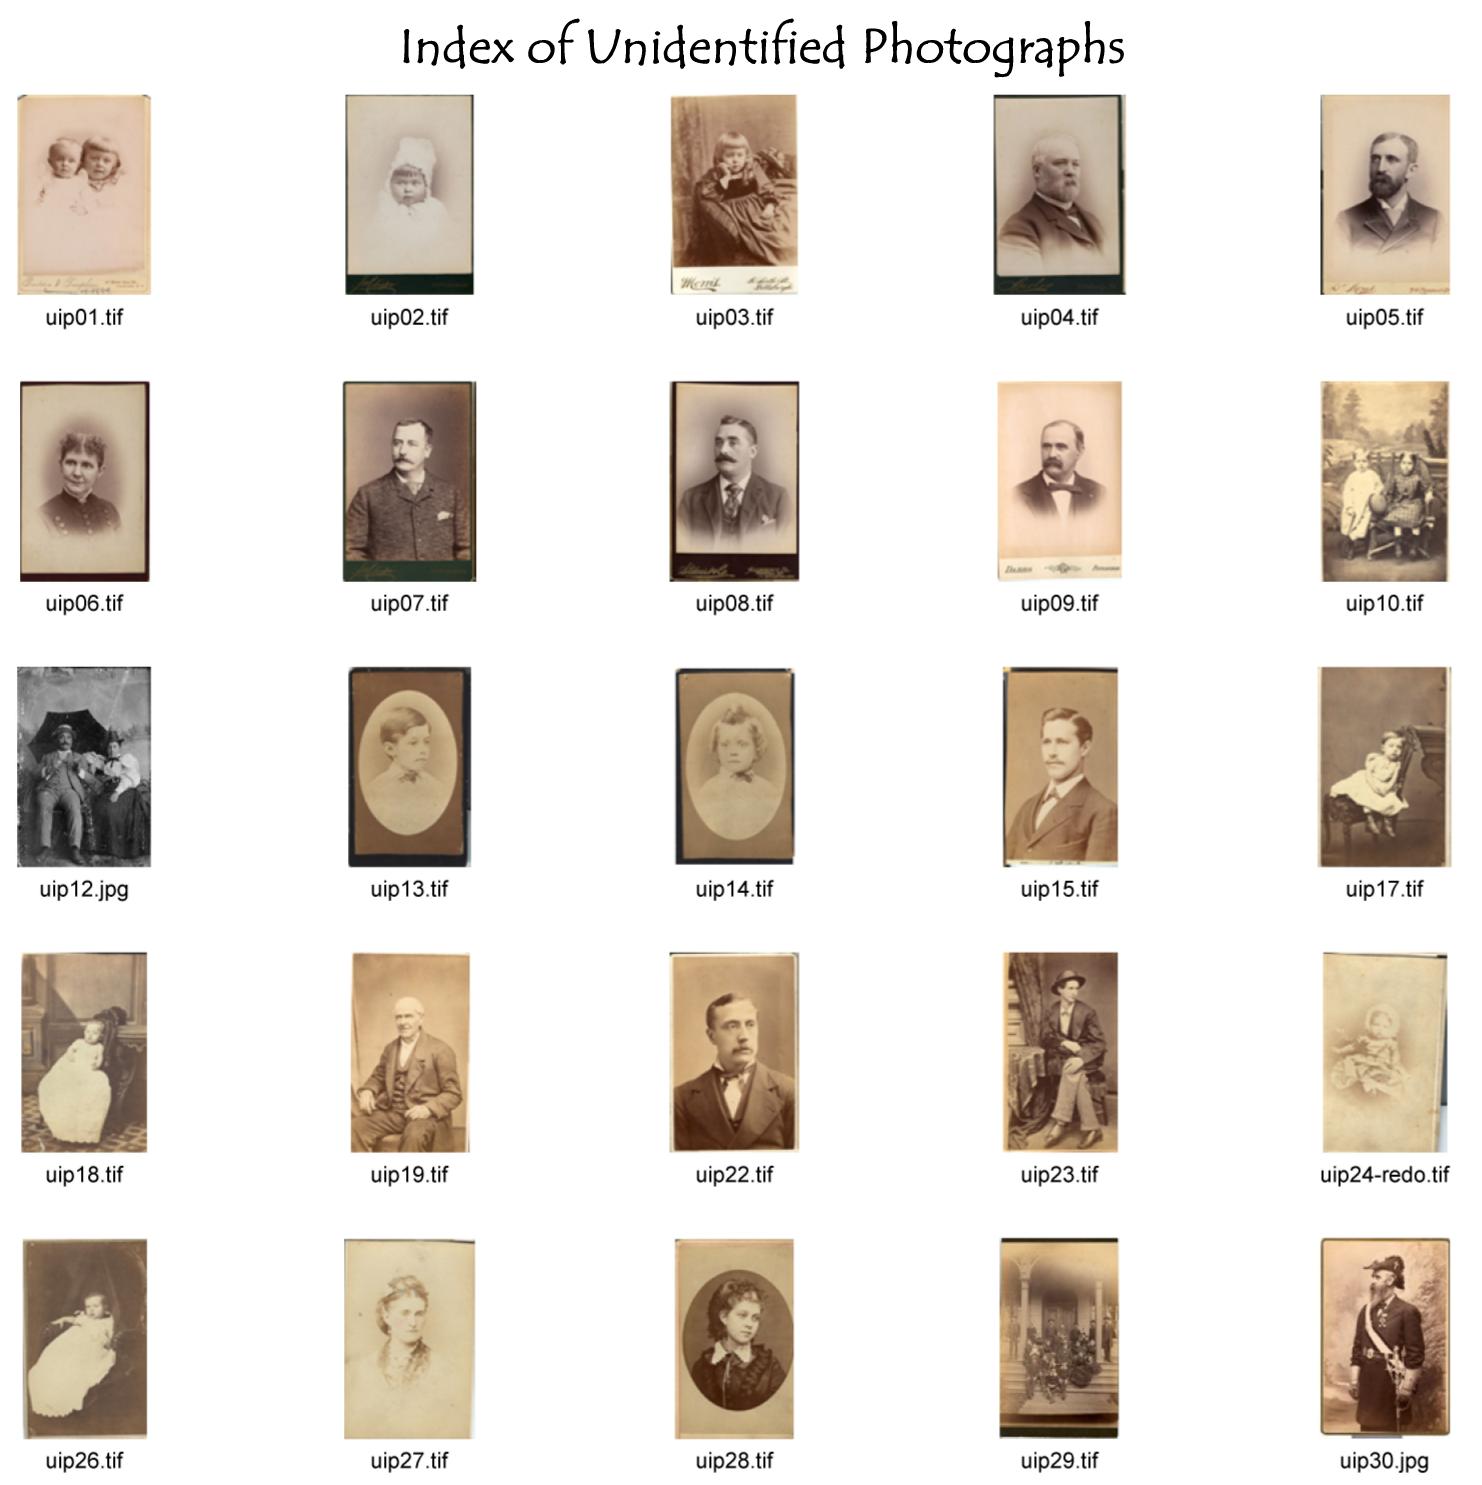 Index of Unidentified Photographs